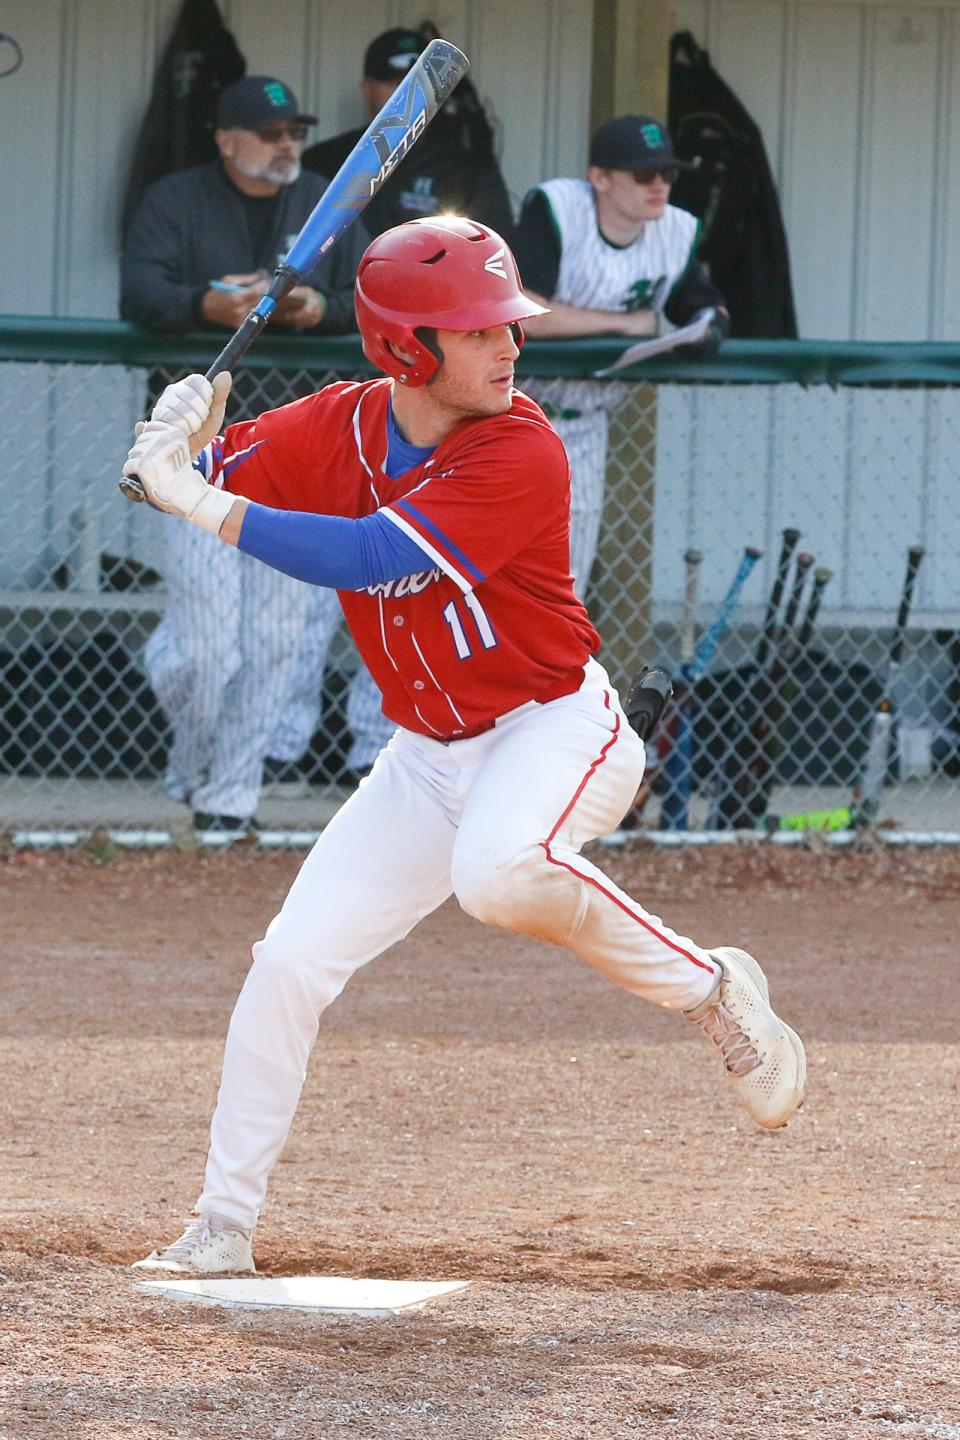 Zane Trace senior Ben Nichols was named the league's Player of the Year after leading the league in batting averages, runs batted in, and runs scored.